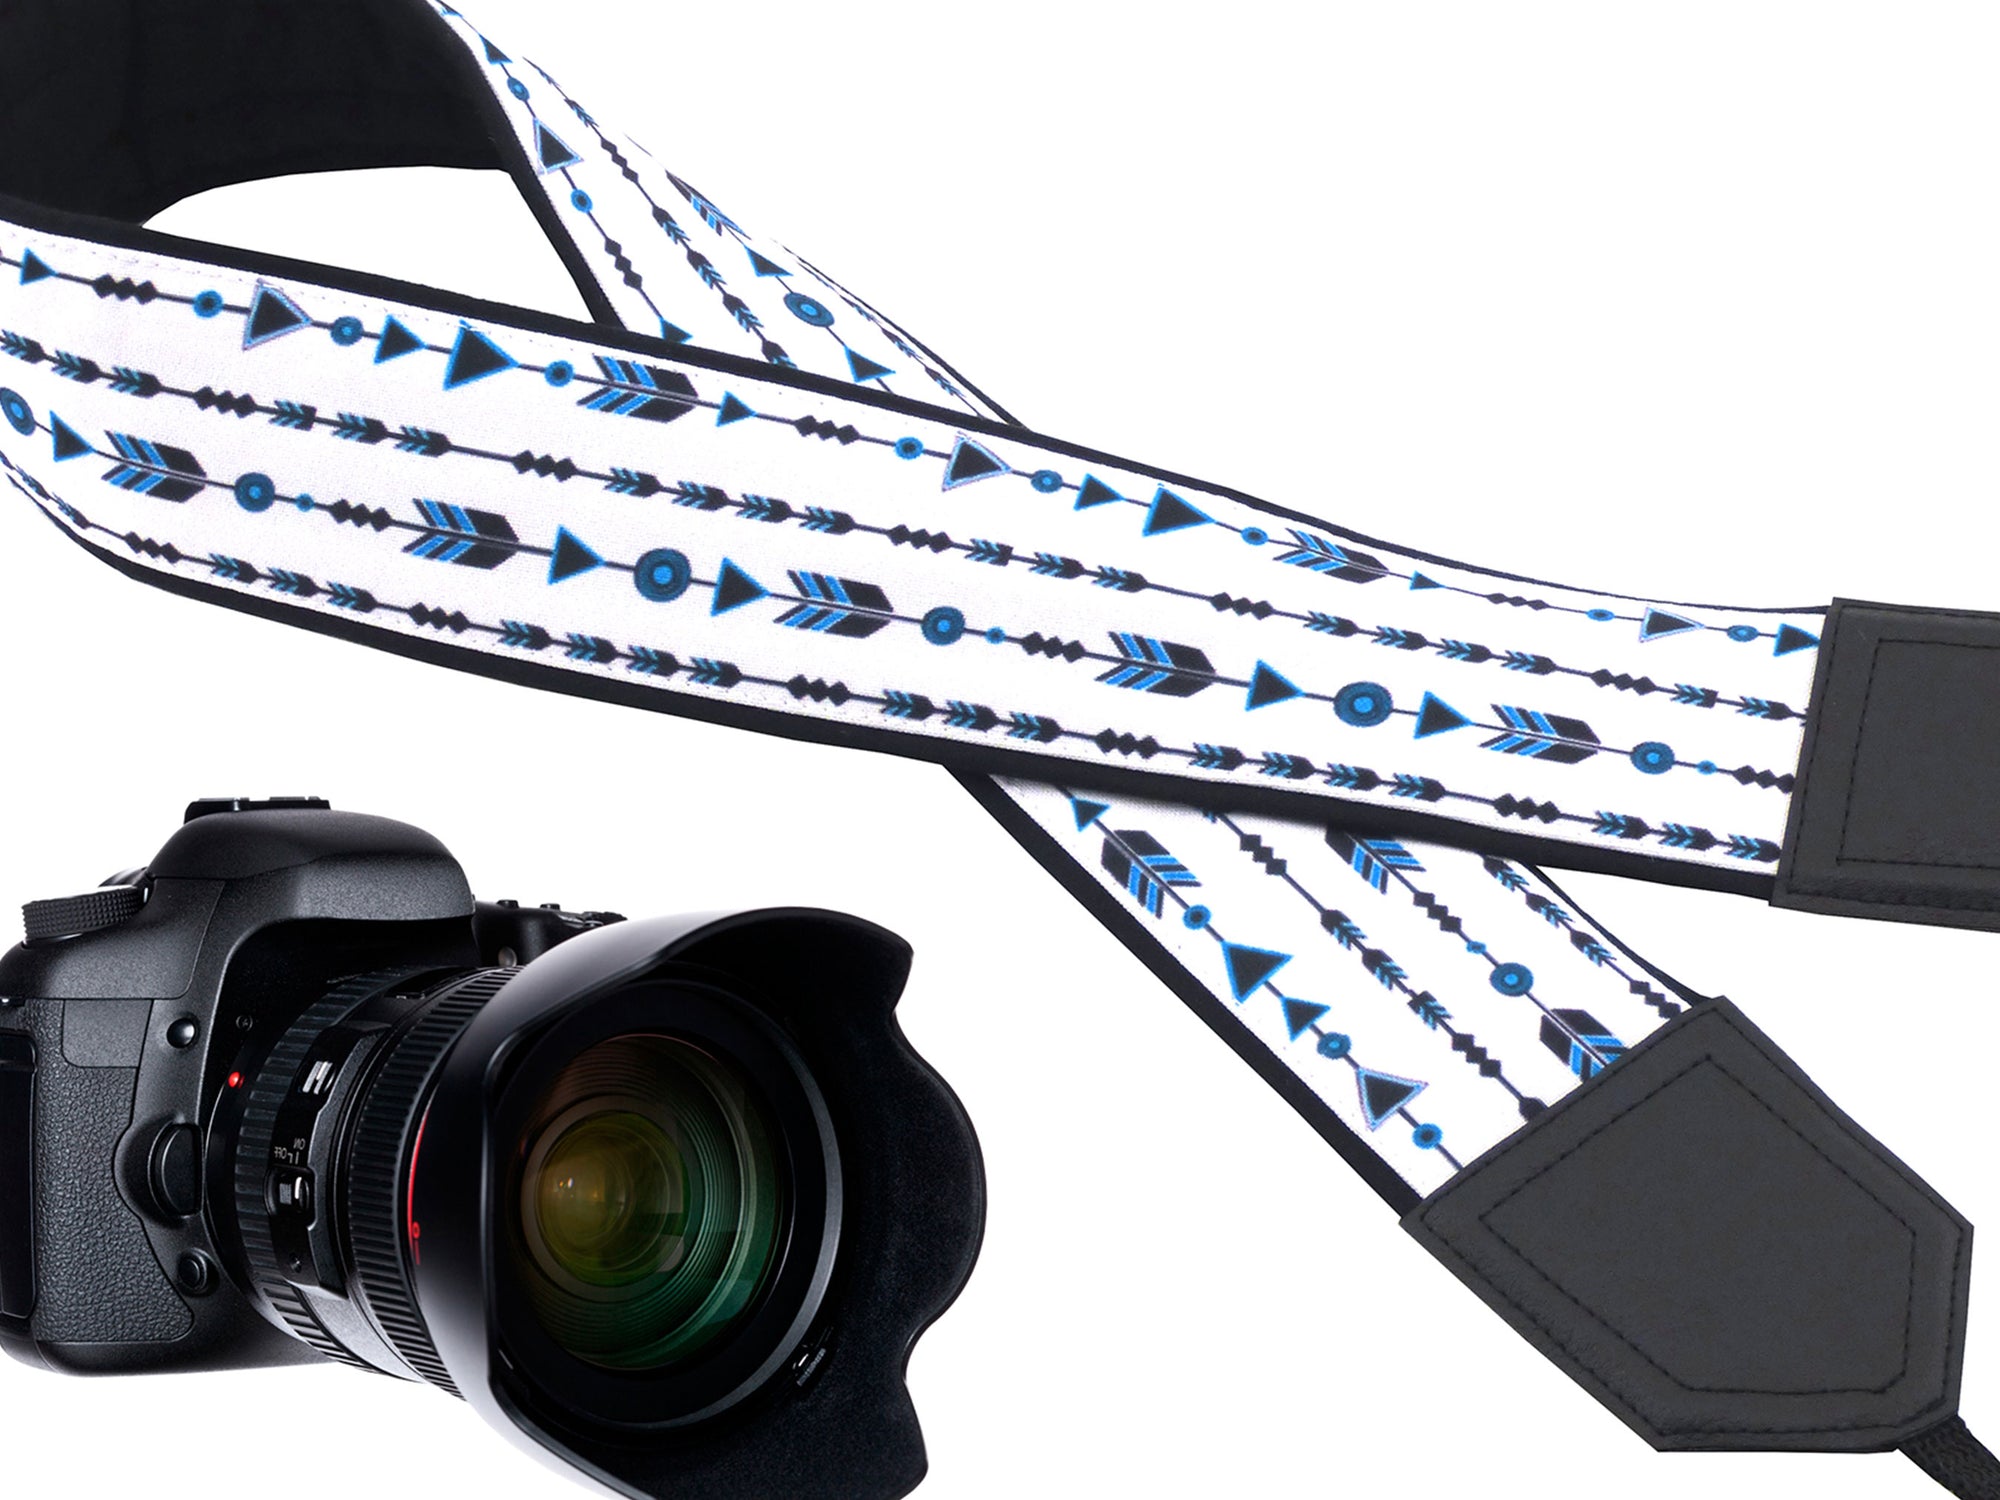 Arrow Design camera strap. Comfortable and secure camera strap. Best gift for travelers by InTePro